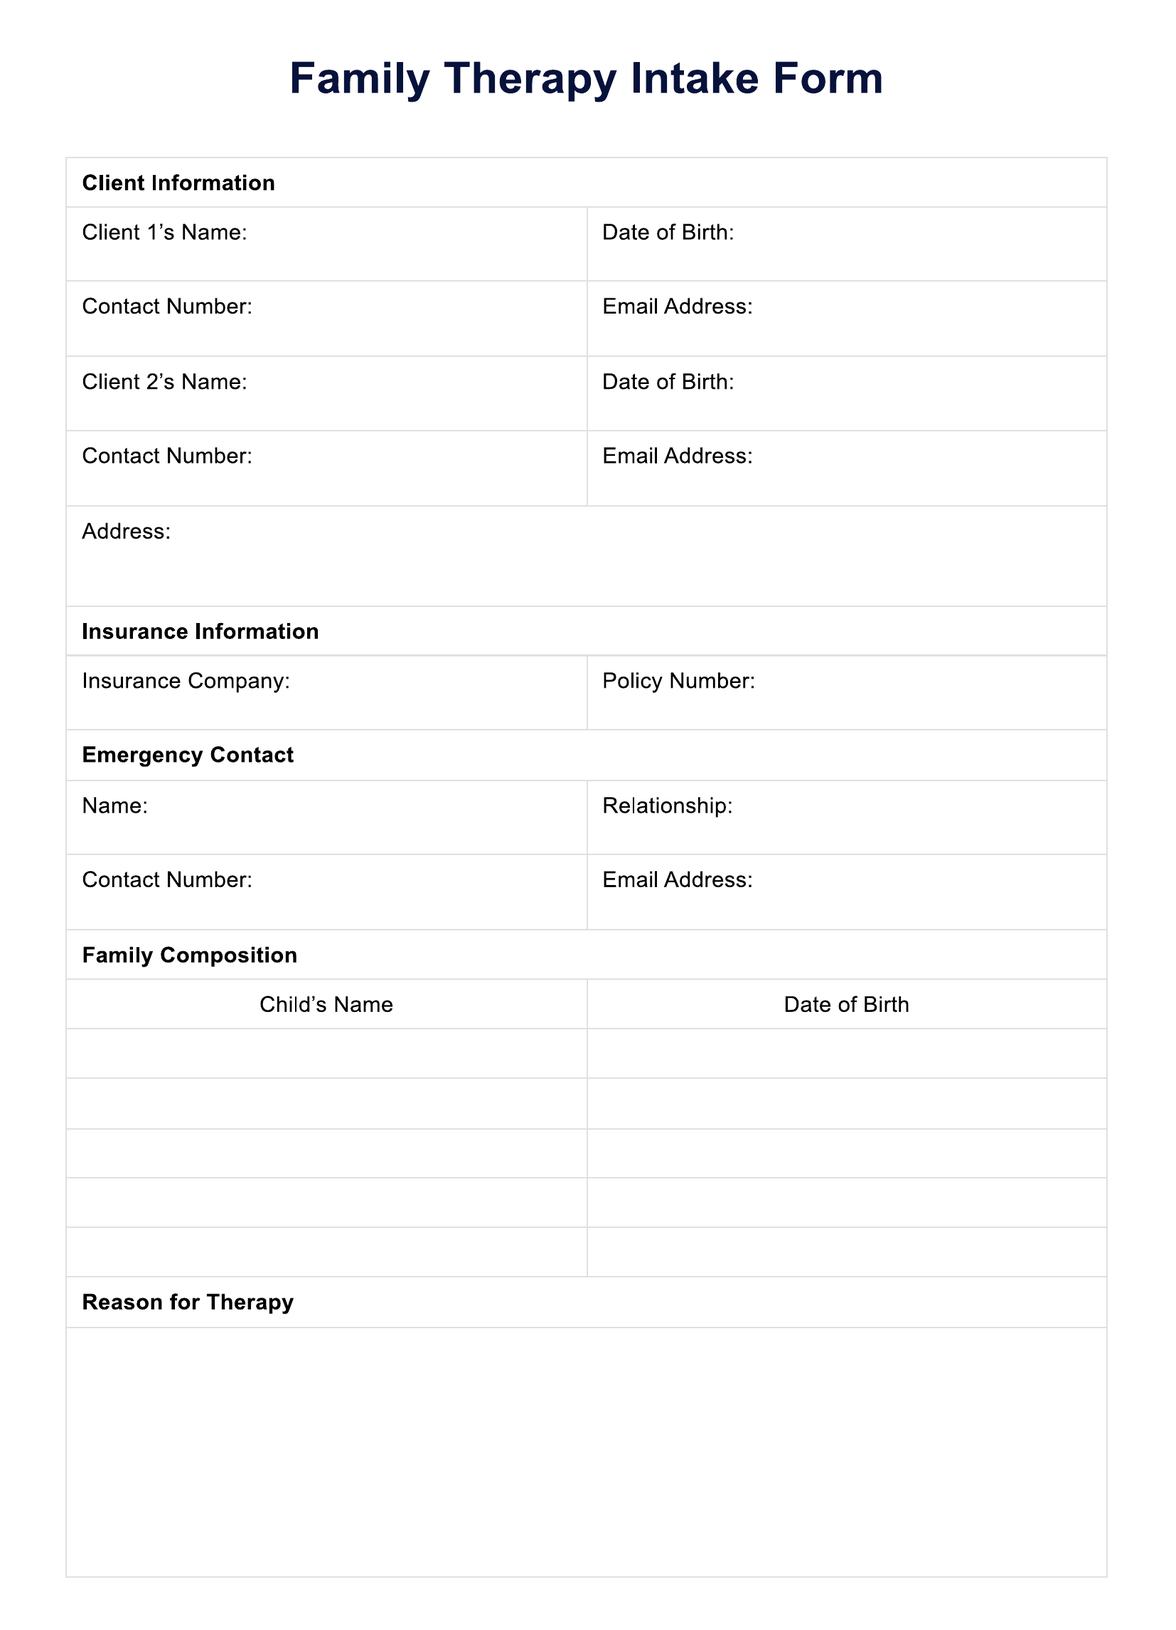 Family Therapy Intake Form PDF Example